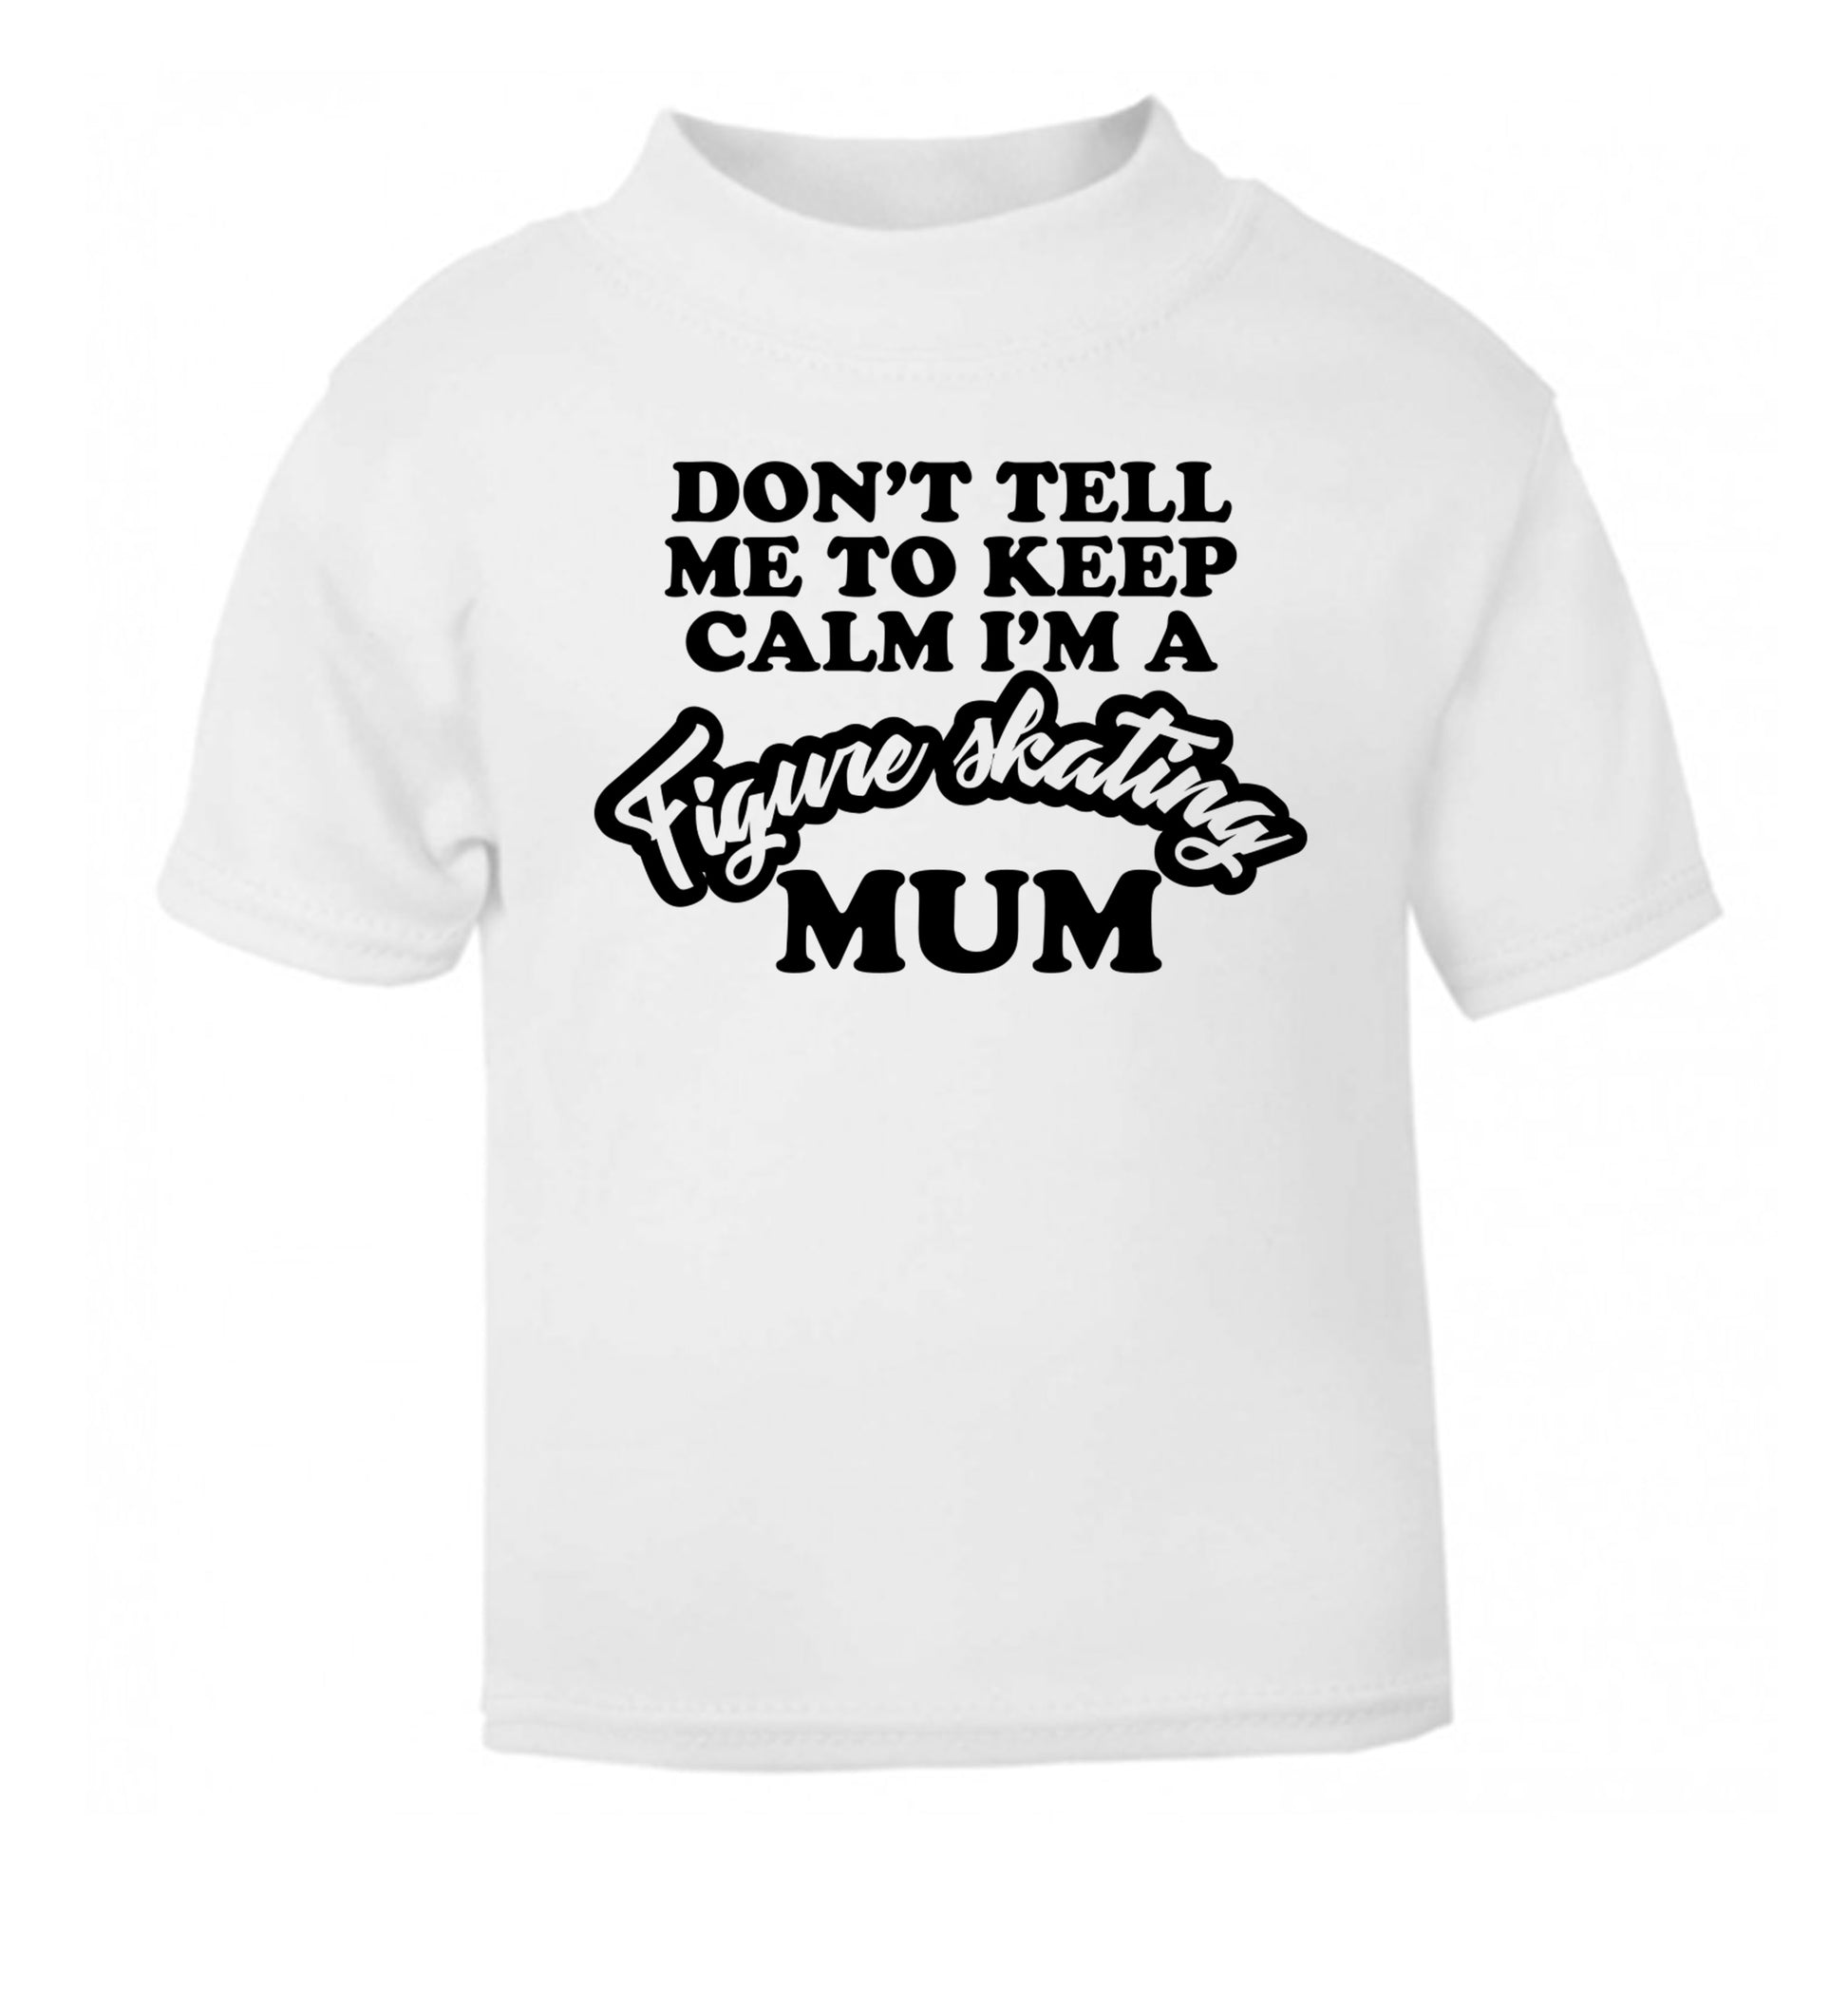 Don't tell me to keep calm I'm a figure skating mum white Baby Toddler Tshirt 2 Years